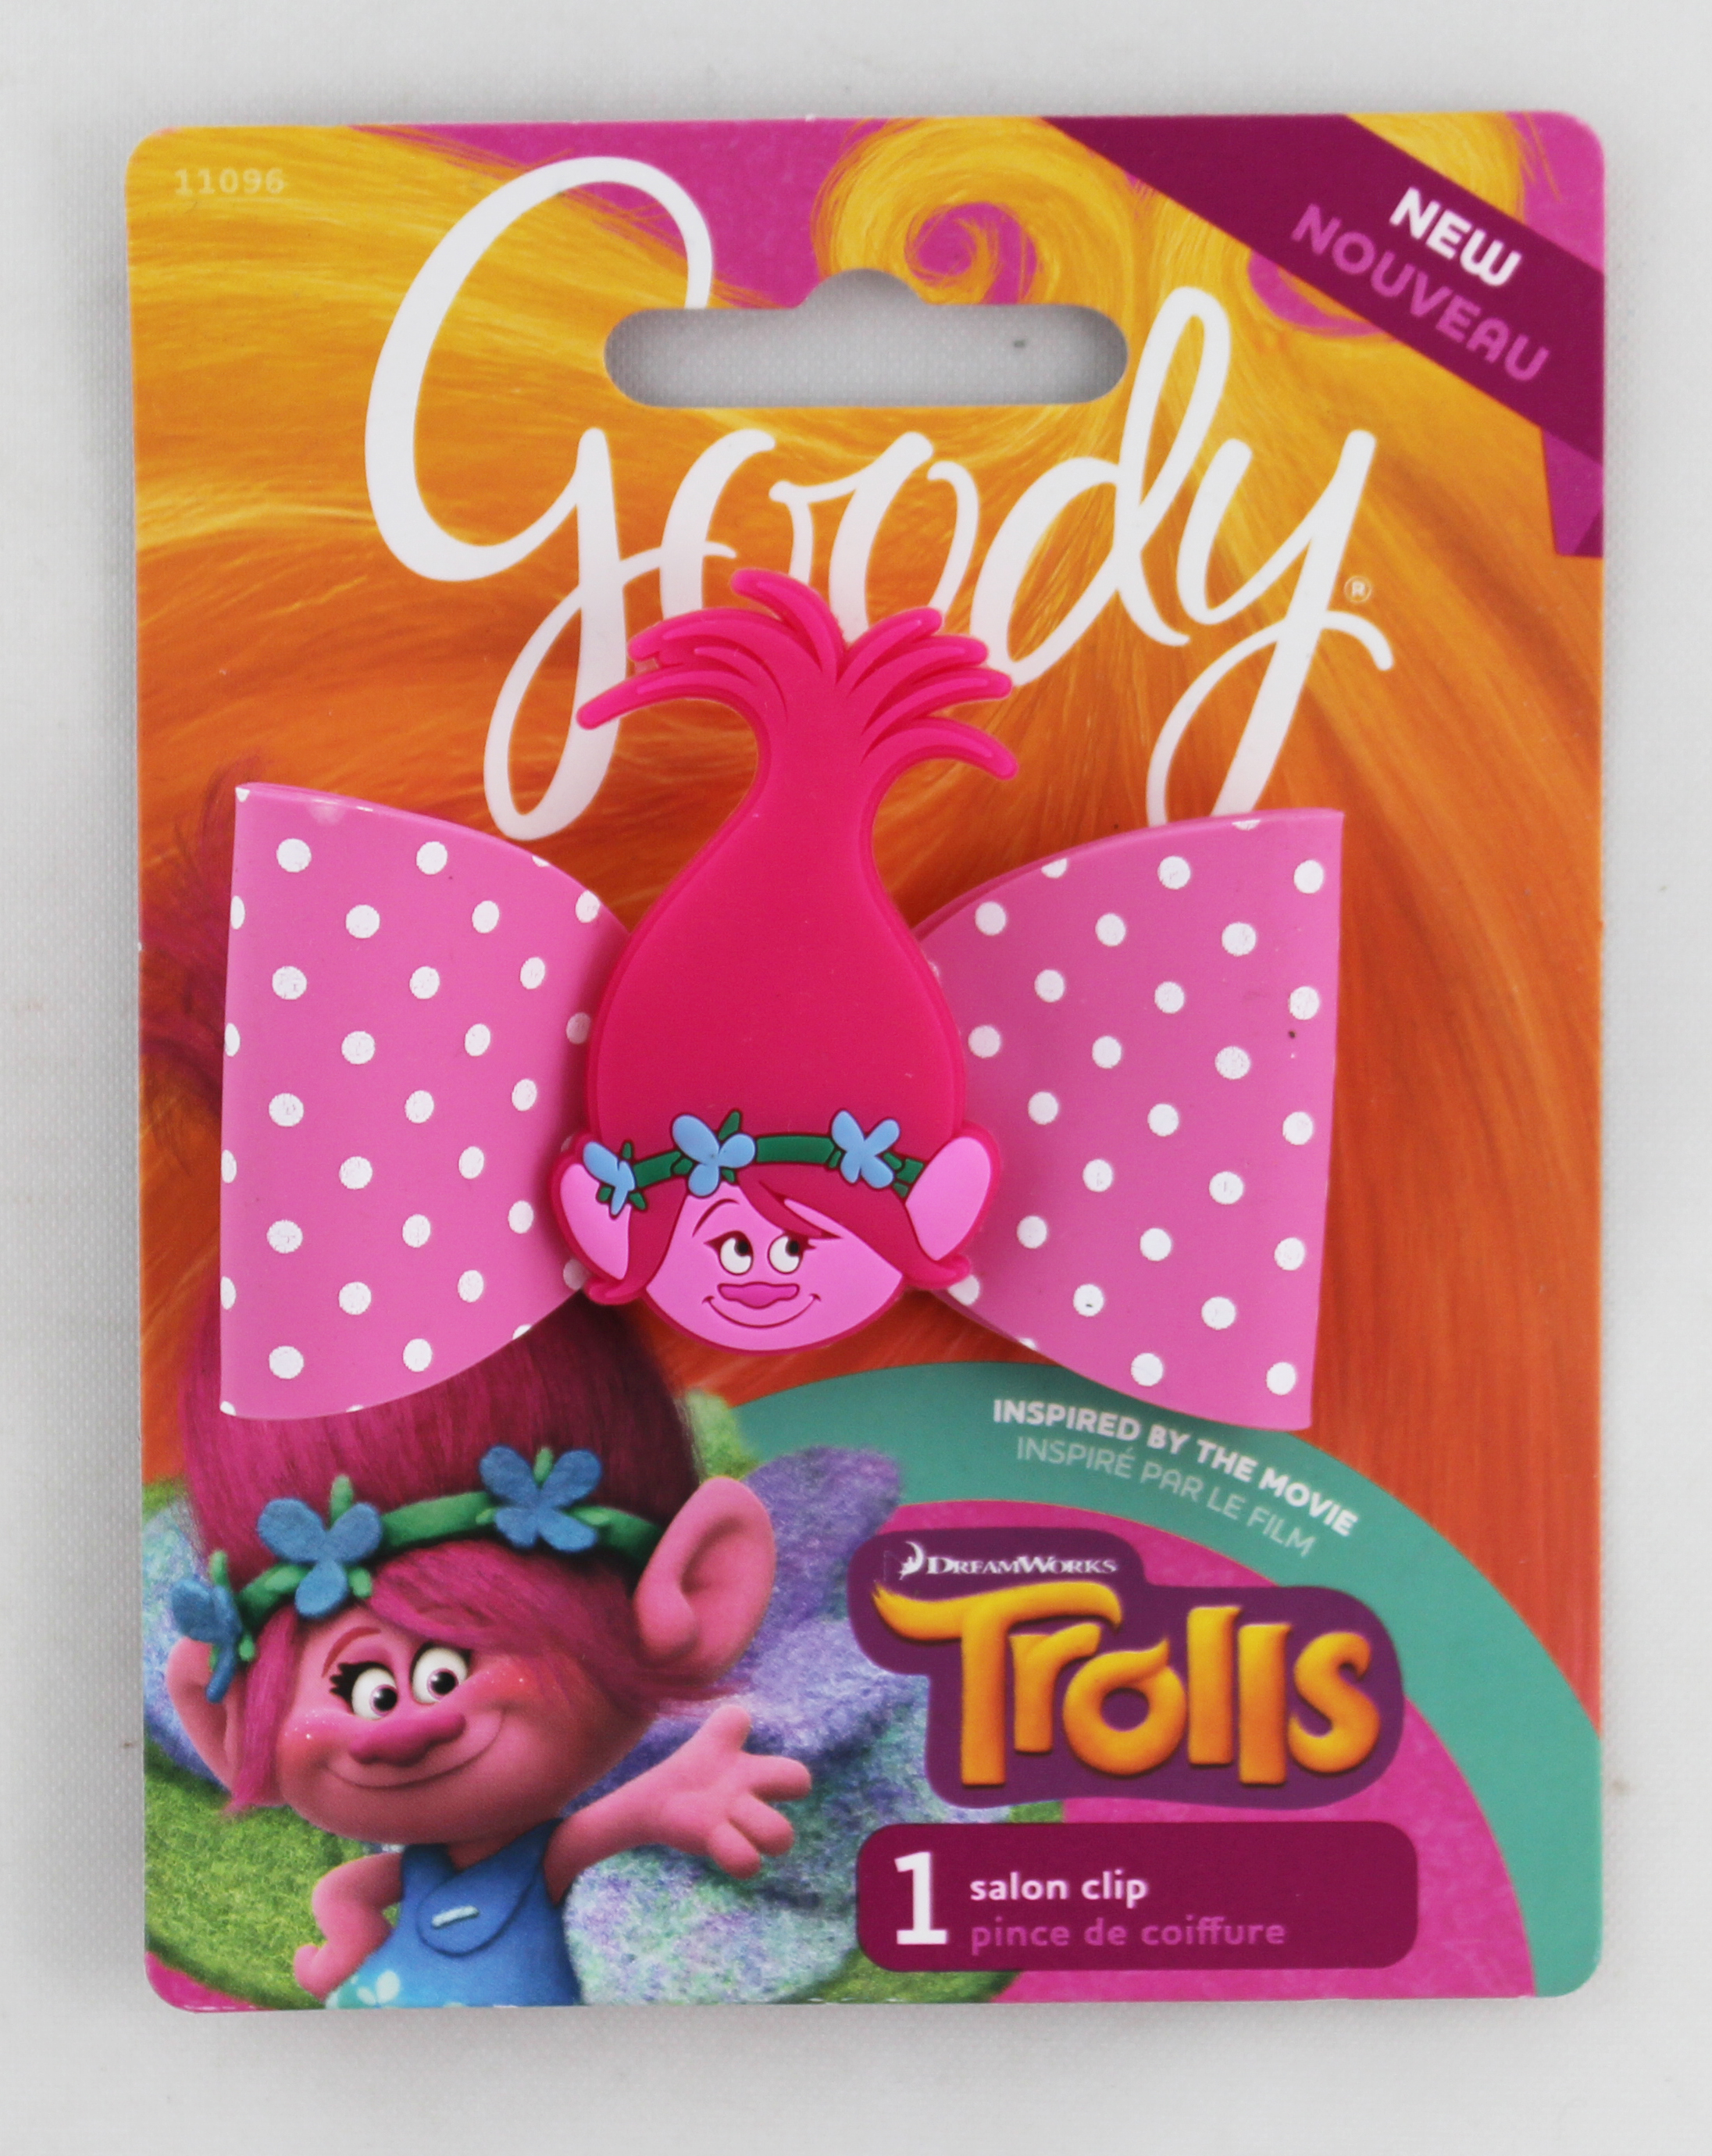 Goody Trolls Value Bow Salon Clip, 1 Count - Click Image to Close